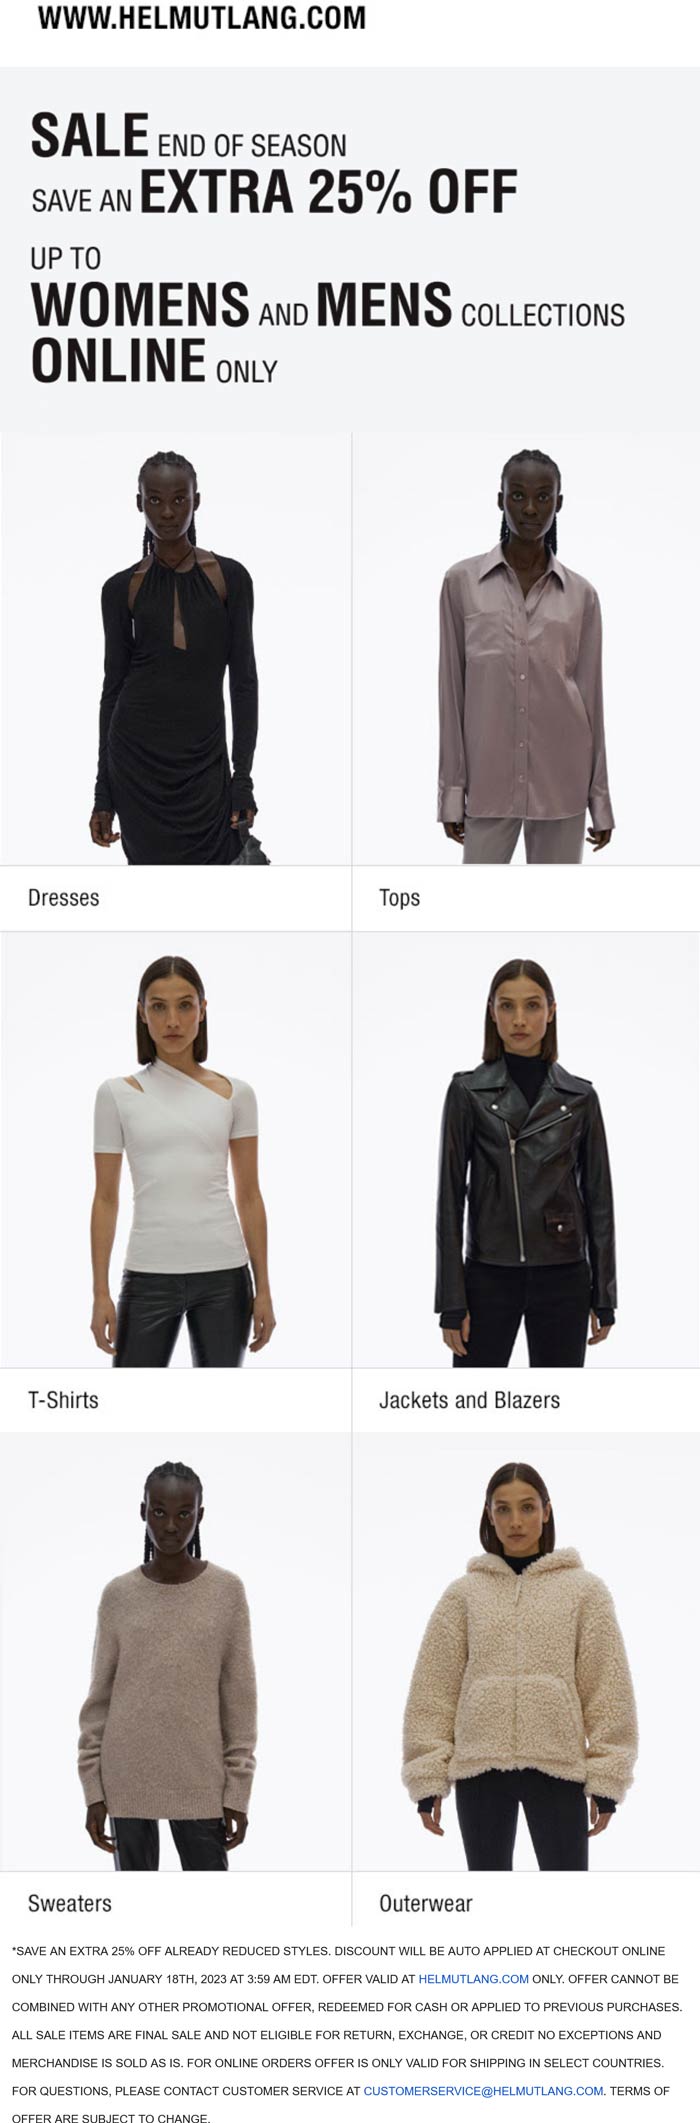 Helmut Lang coupons & promo code for [February 2023]